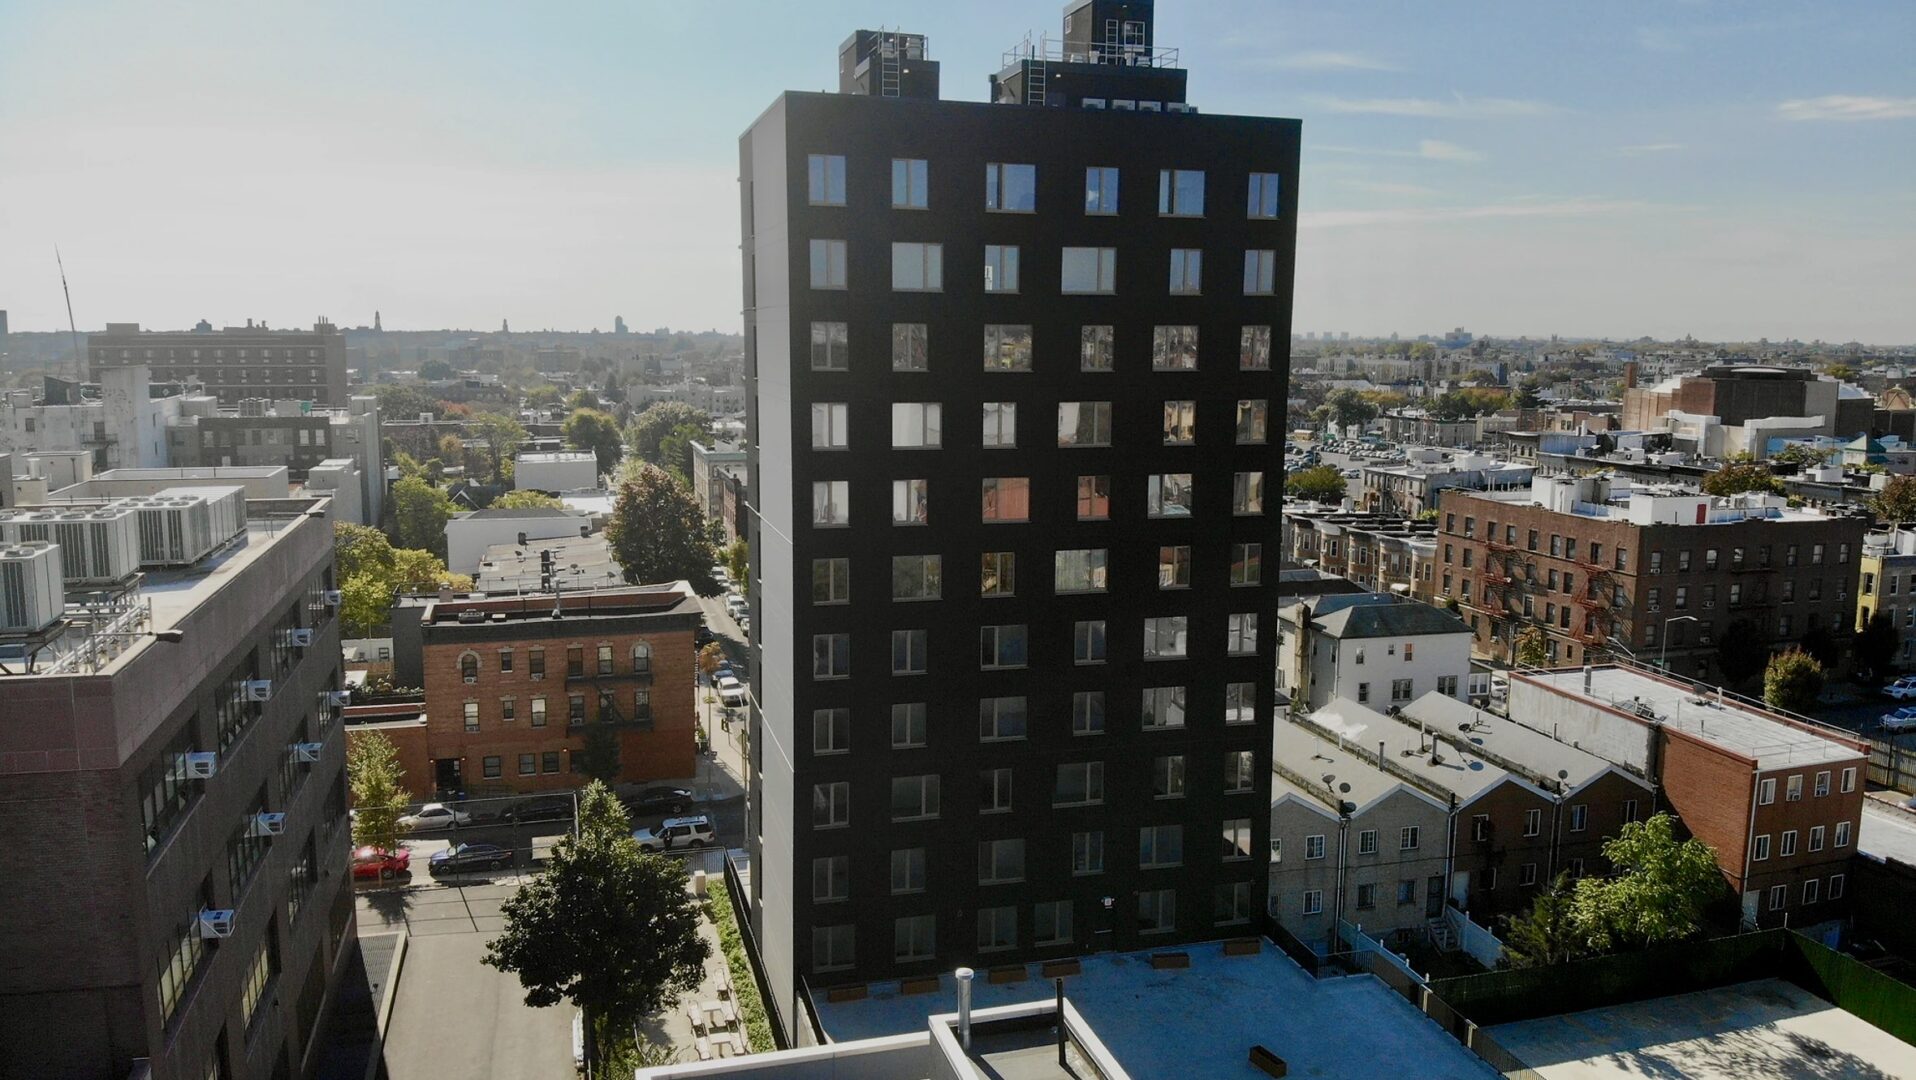 An aerial view of a black building in a city.